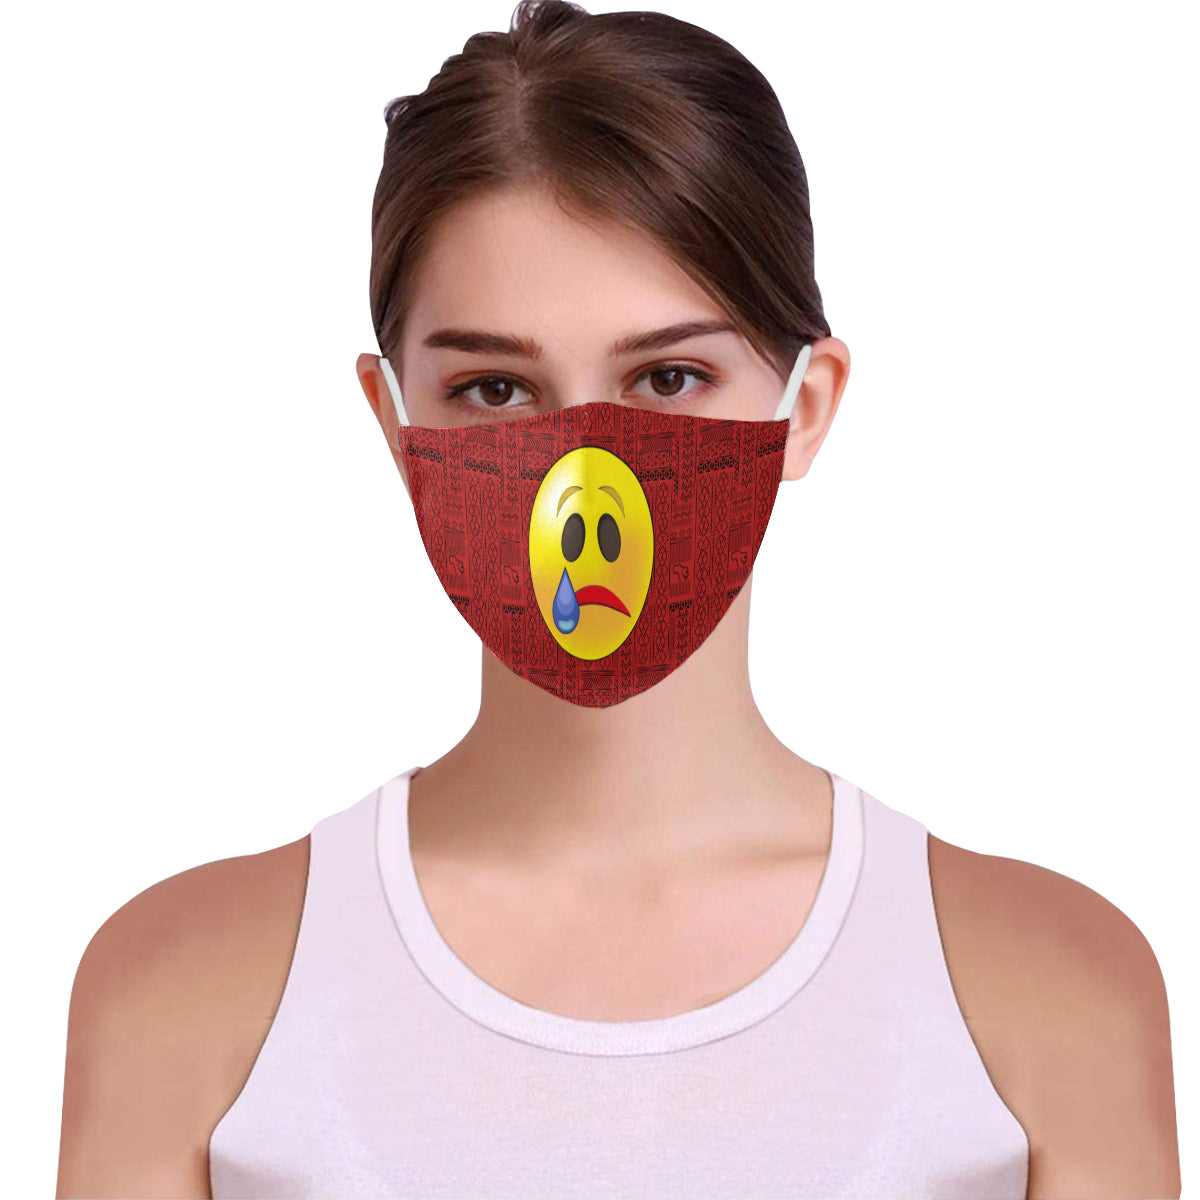 Crying Tribal Print Emoji Cotton Fabric Face Mask with Filter Slot and Adjustable Strap - Non-medical use (2 Filters Included)